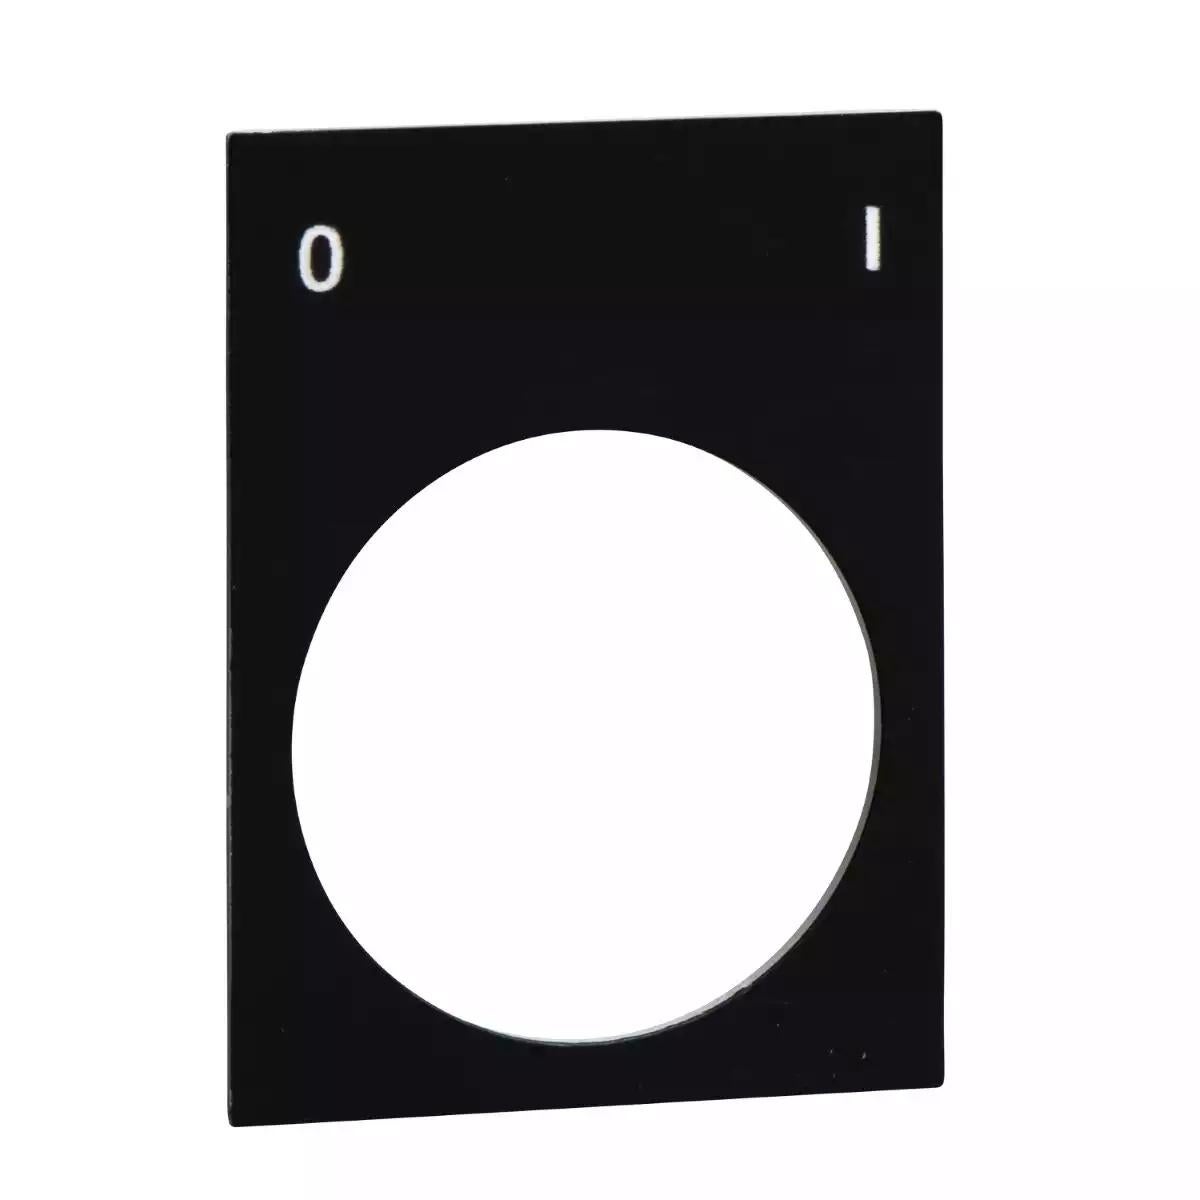 Marked legend, Harmony XAC, nameplate, 30 x 40mm, plastic, black, 22mm selector switch, white marked O-I